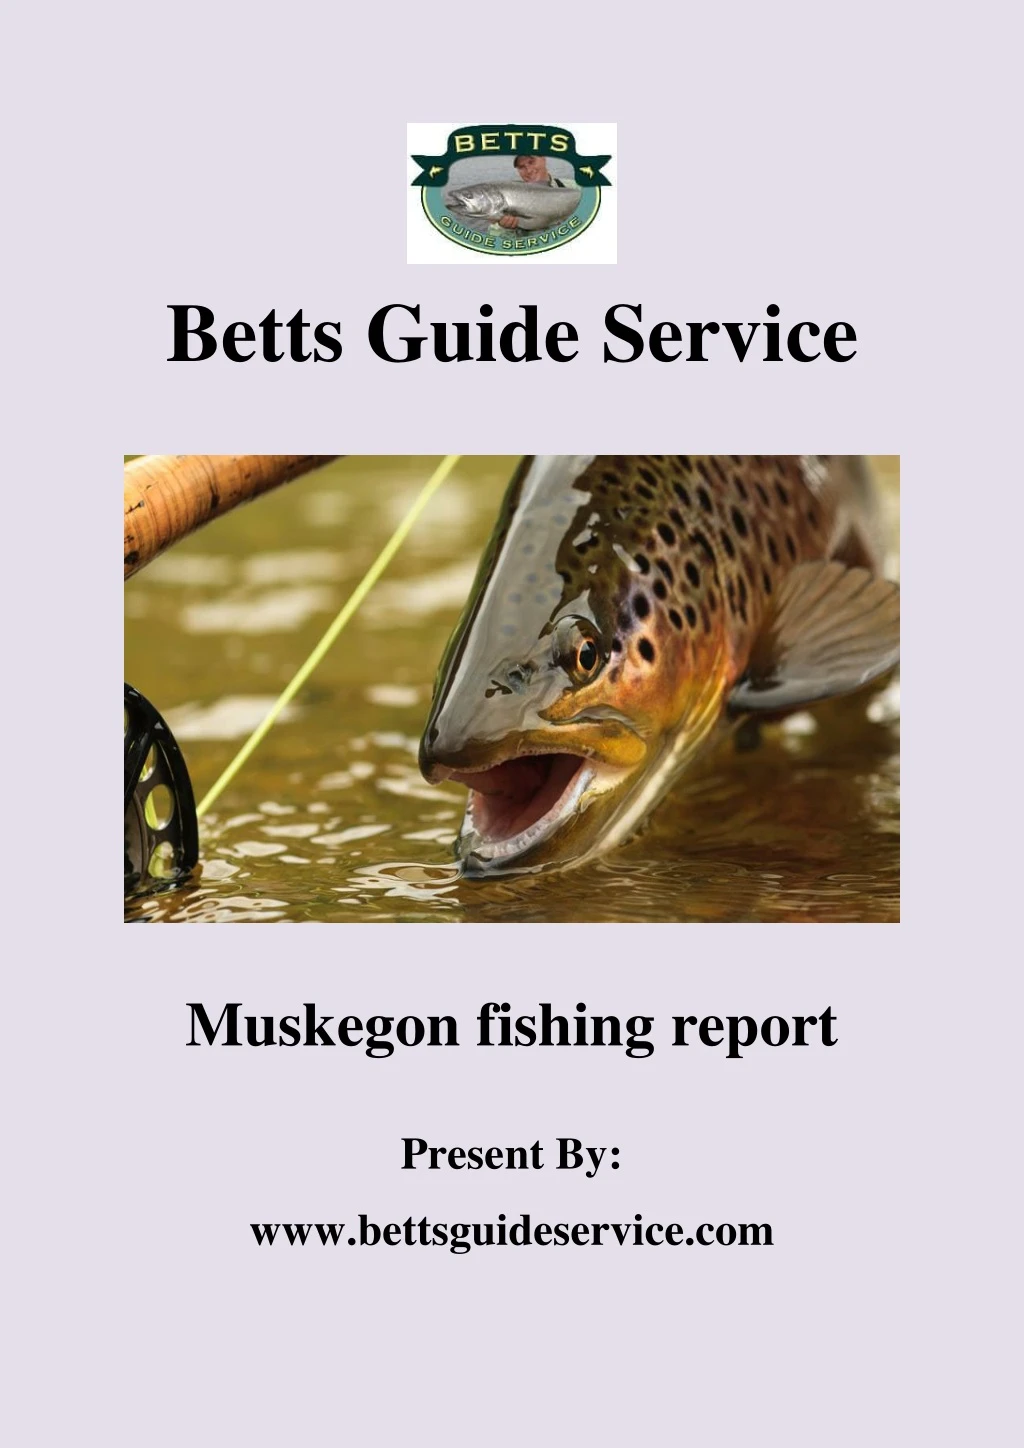 betts guide service